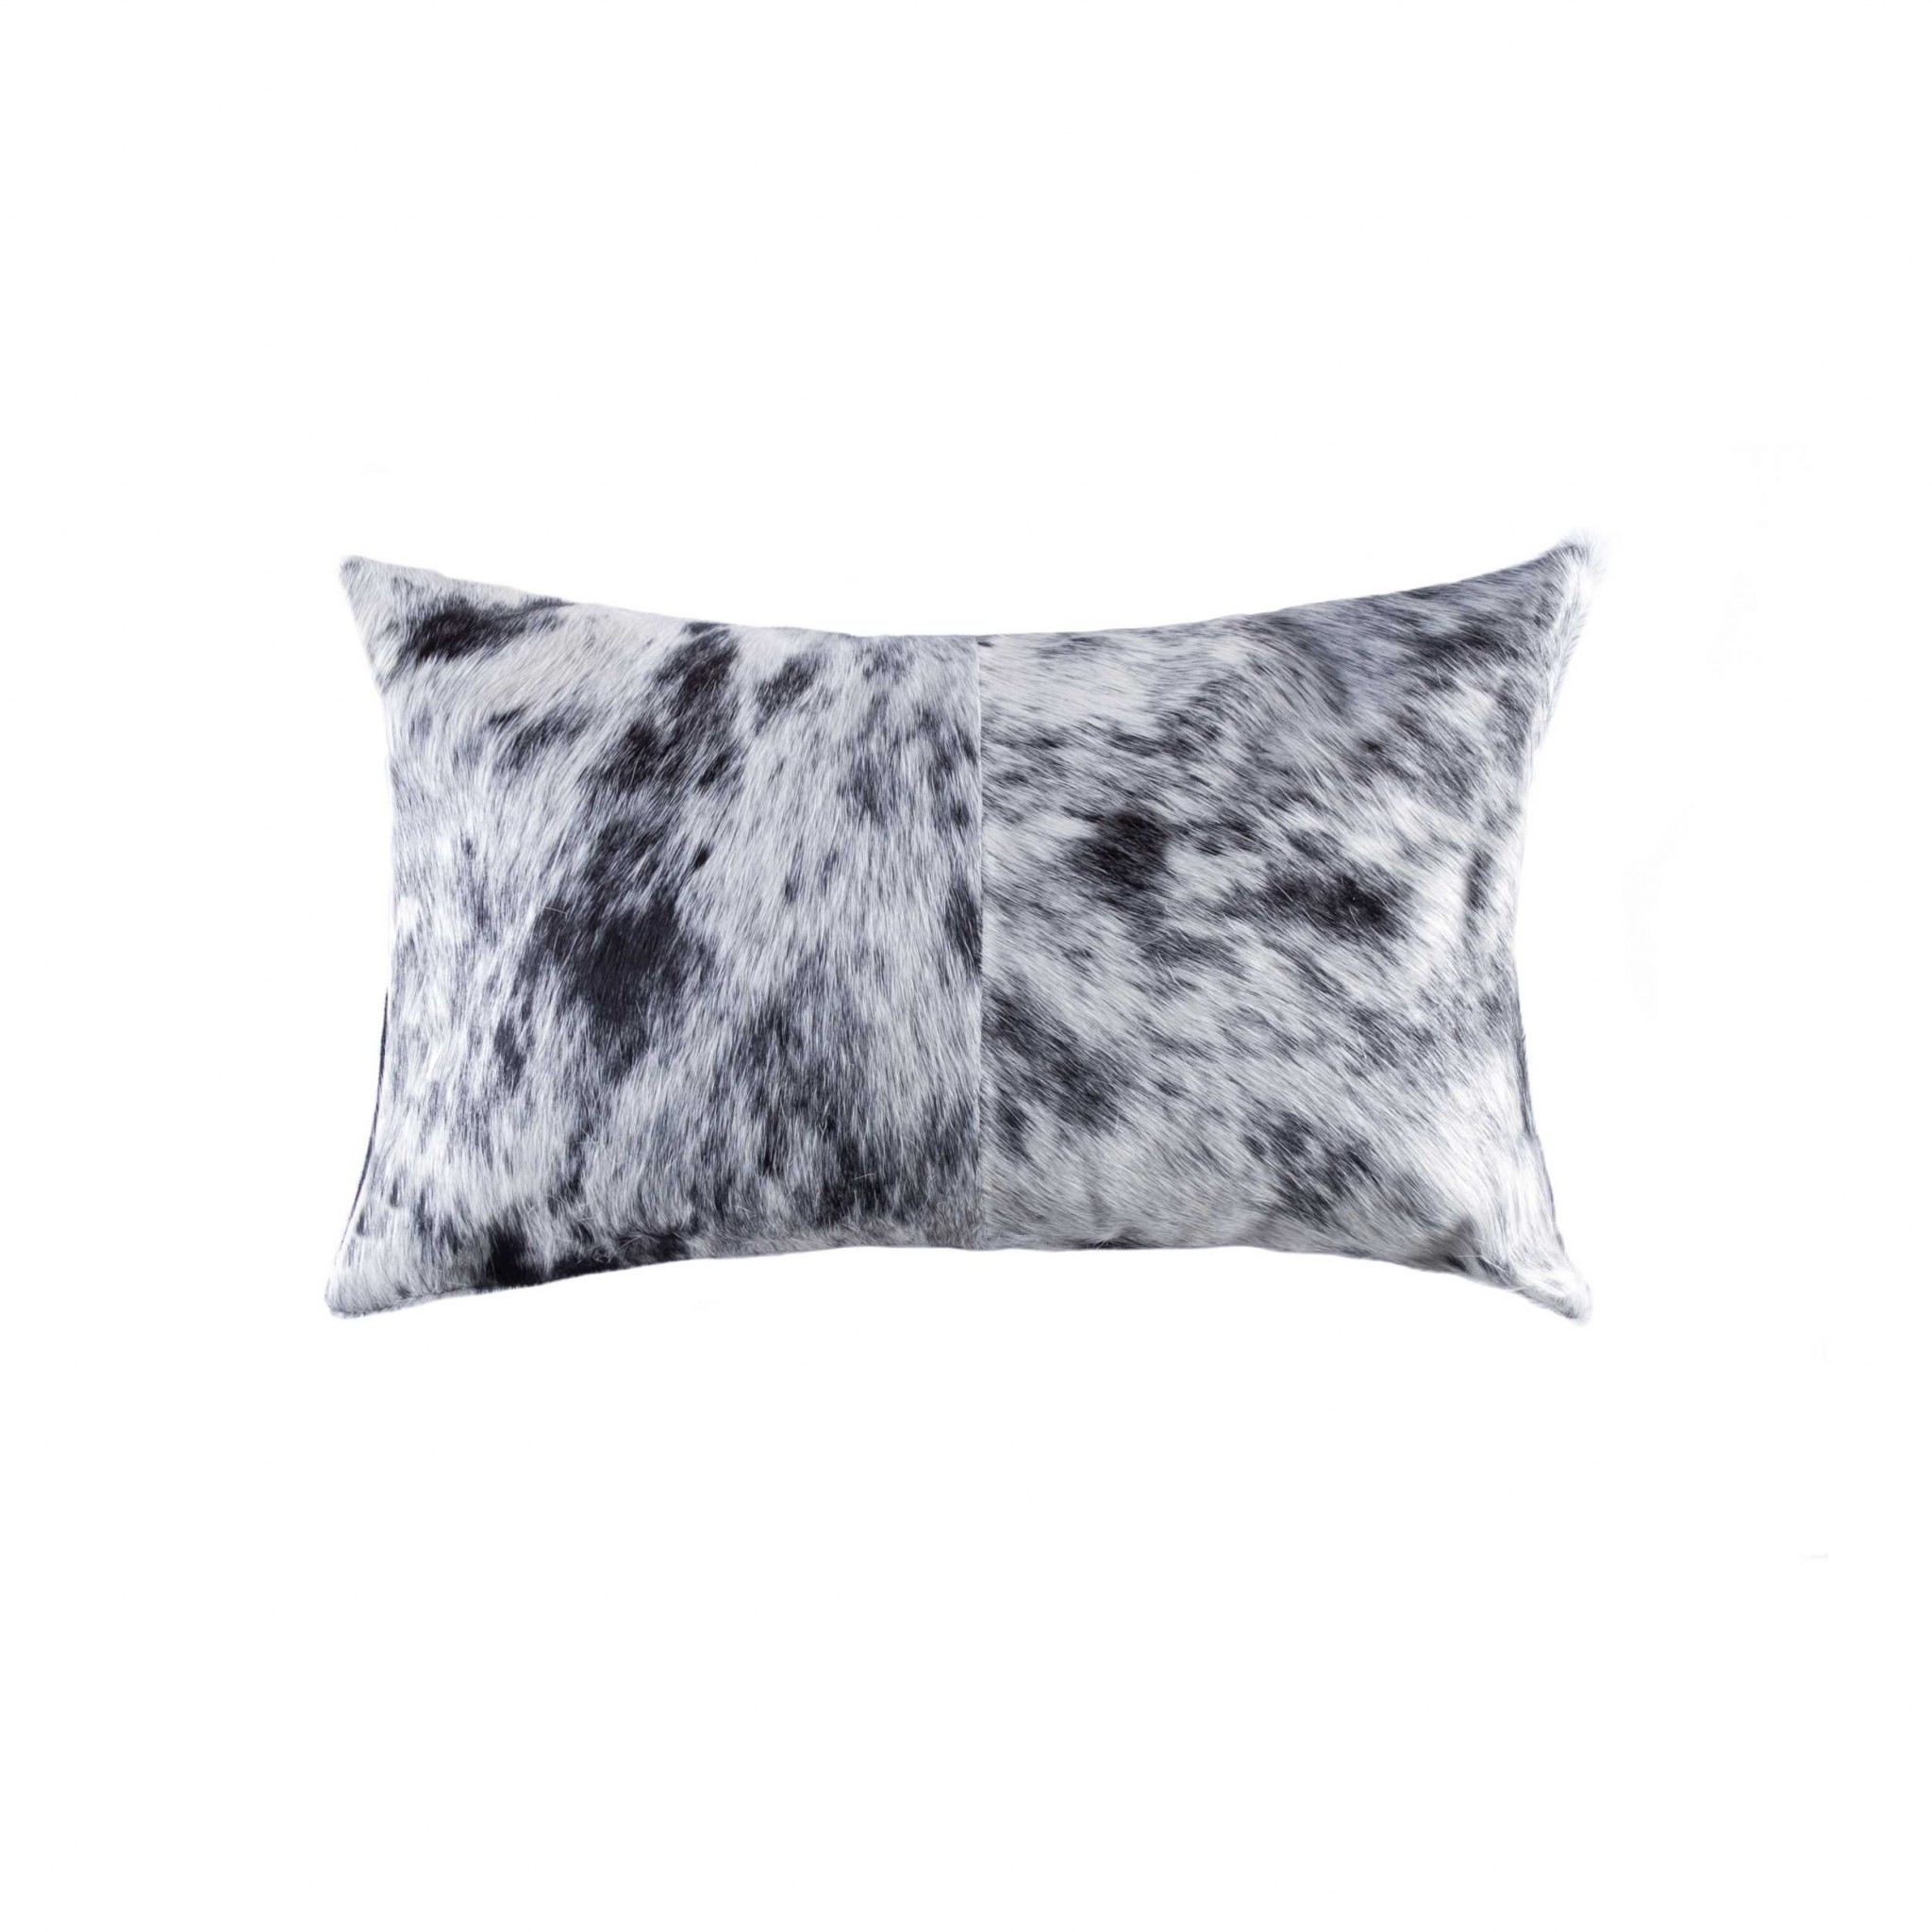 18" x 18" x 5" Salt And Pepper Black And White Cowhide - Pillow